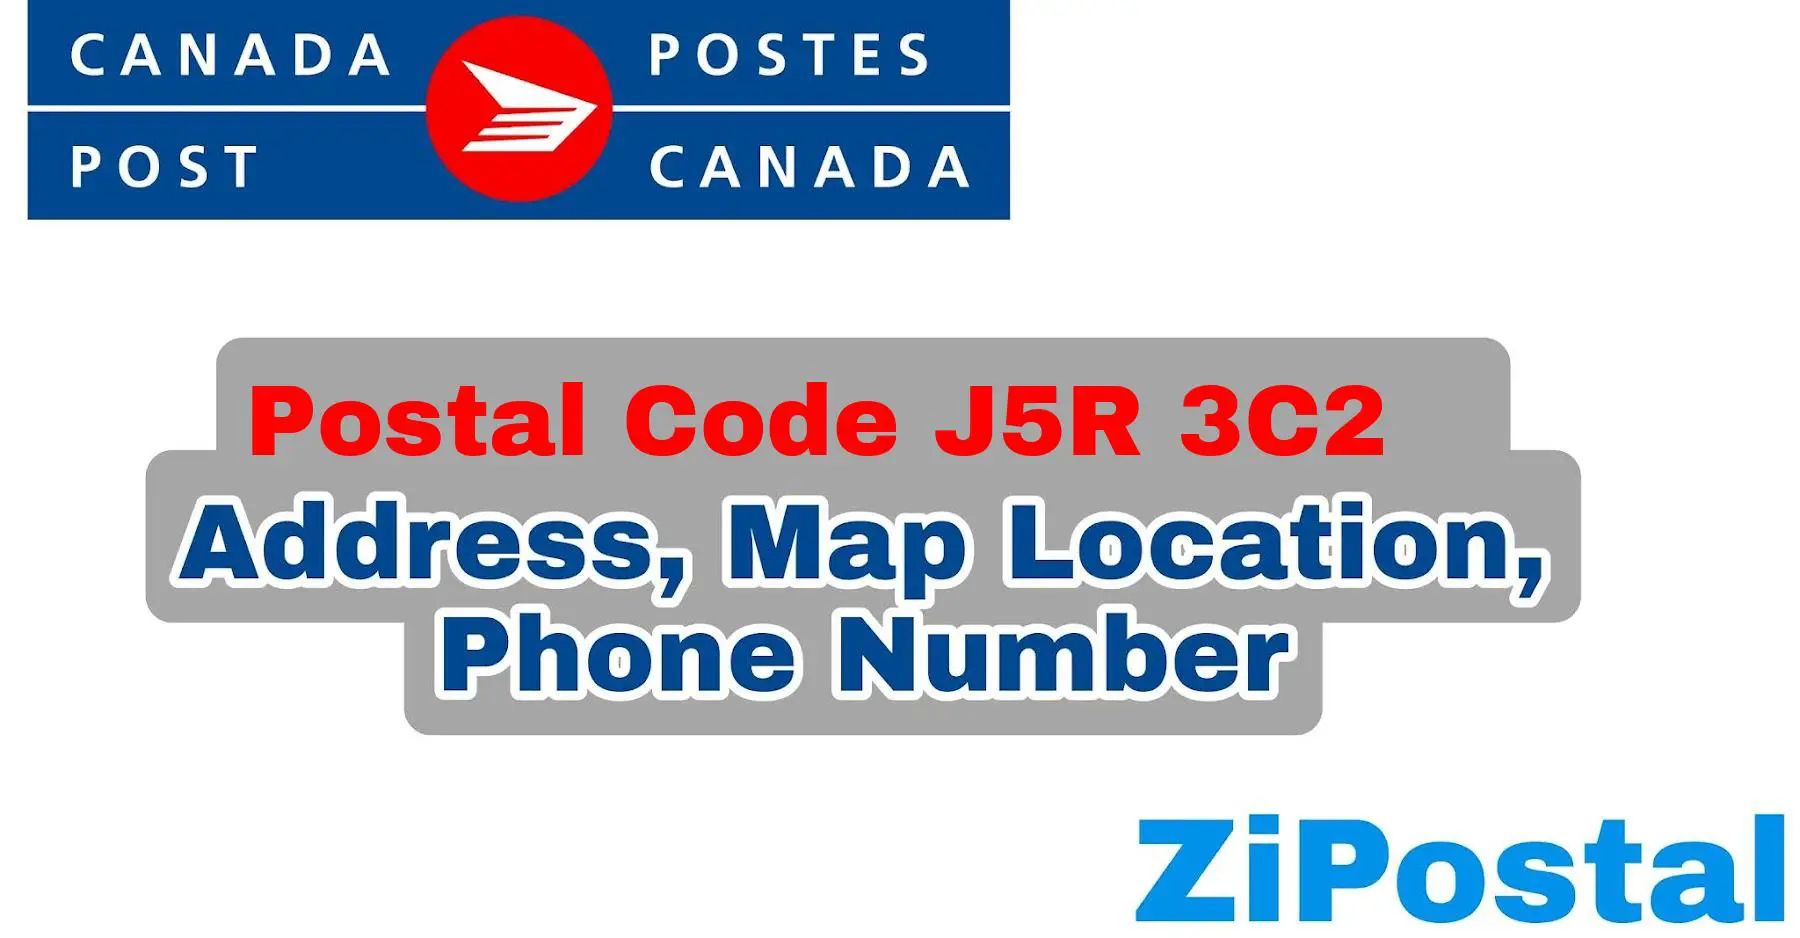 Postal Code J5R 3C2 Address Map Location and Phone Number